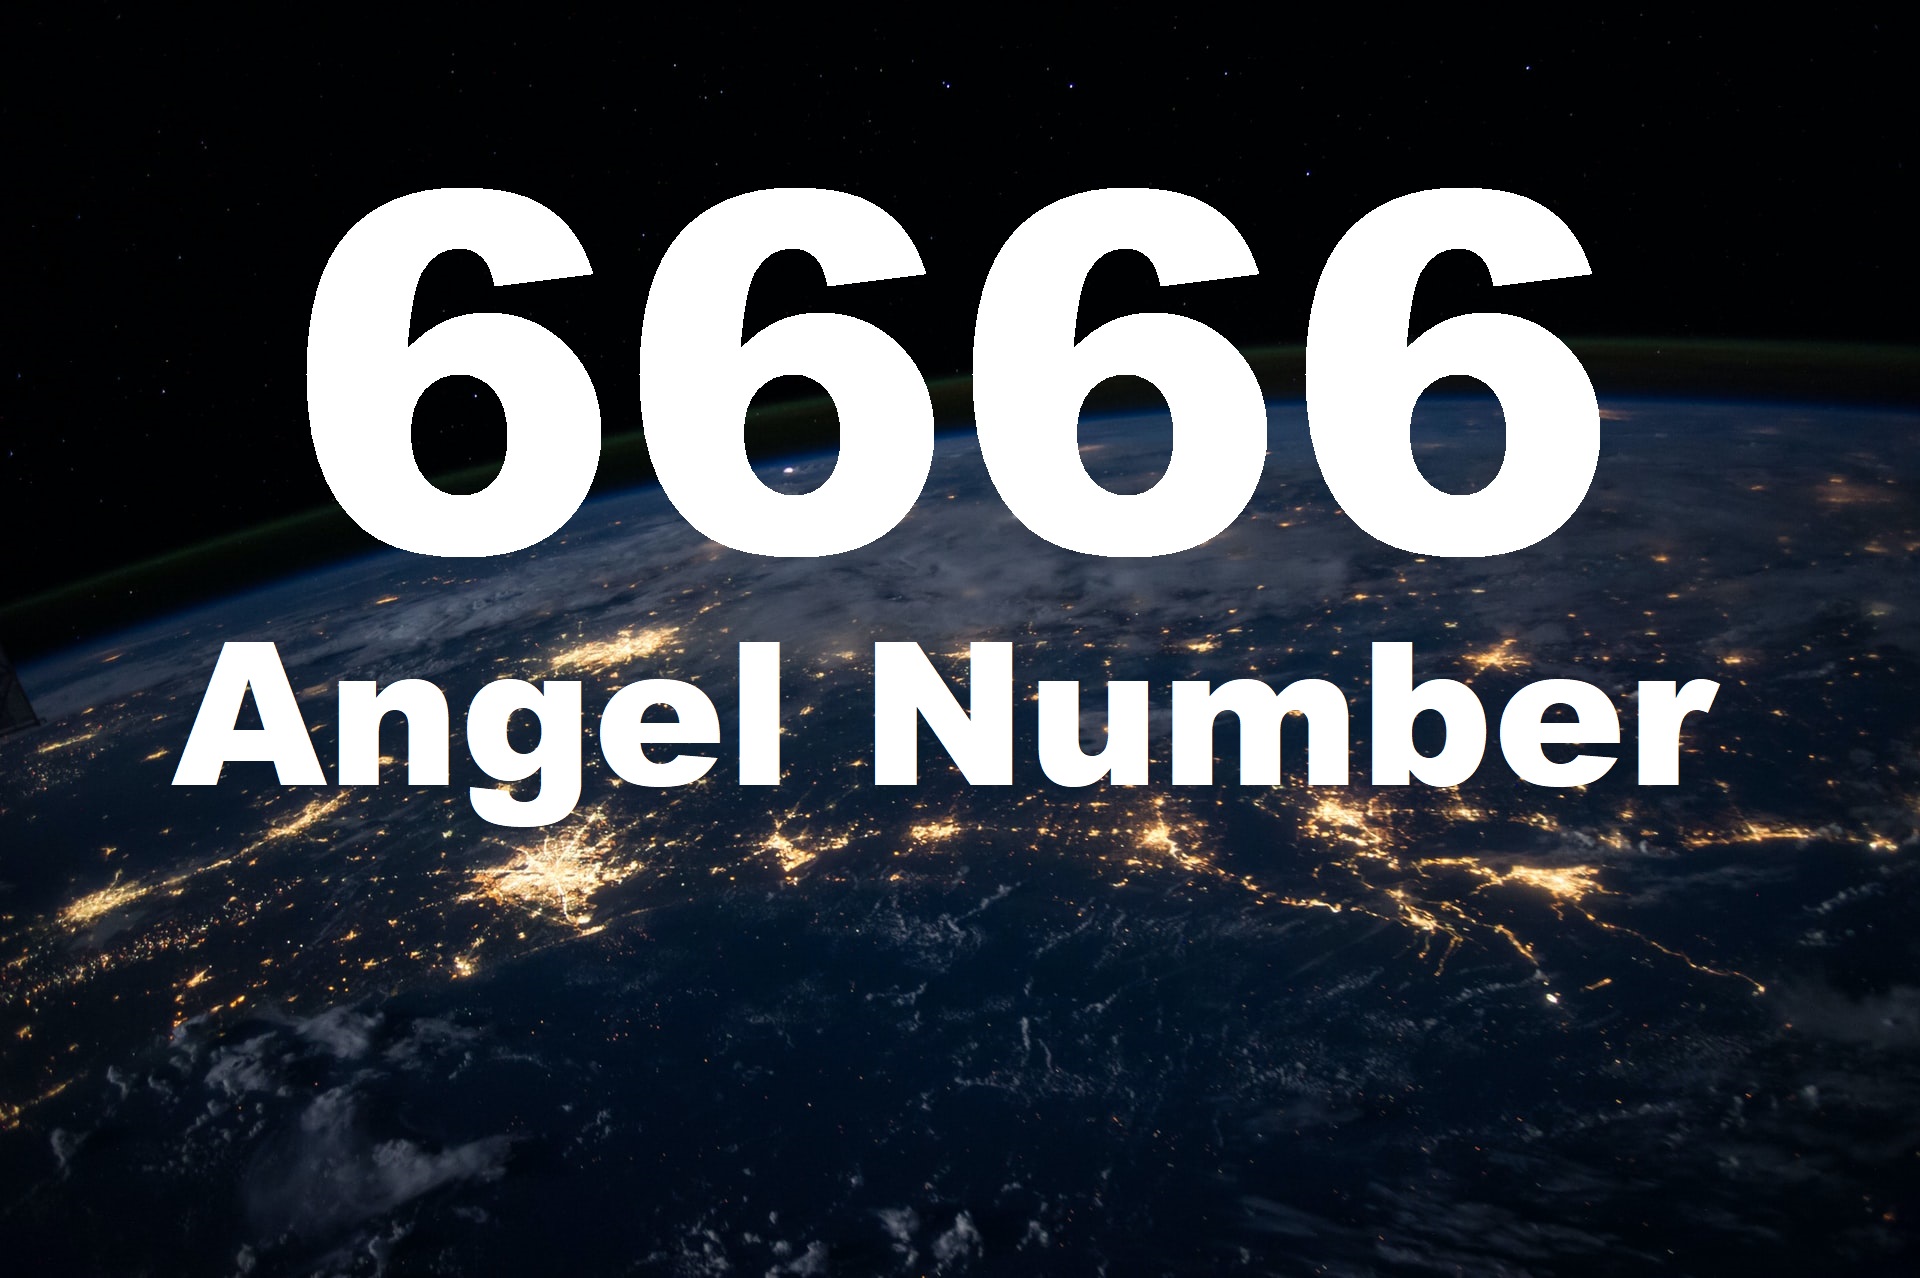 6666 Angel Number Meaning - Balance And Stability